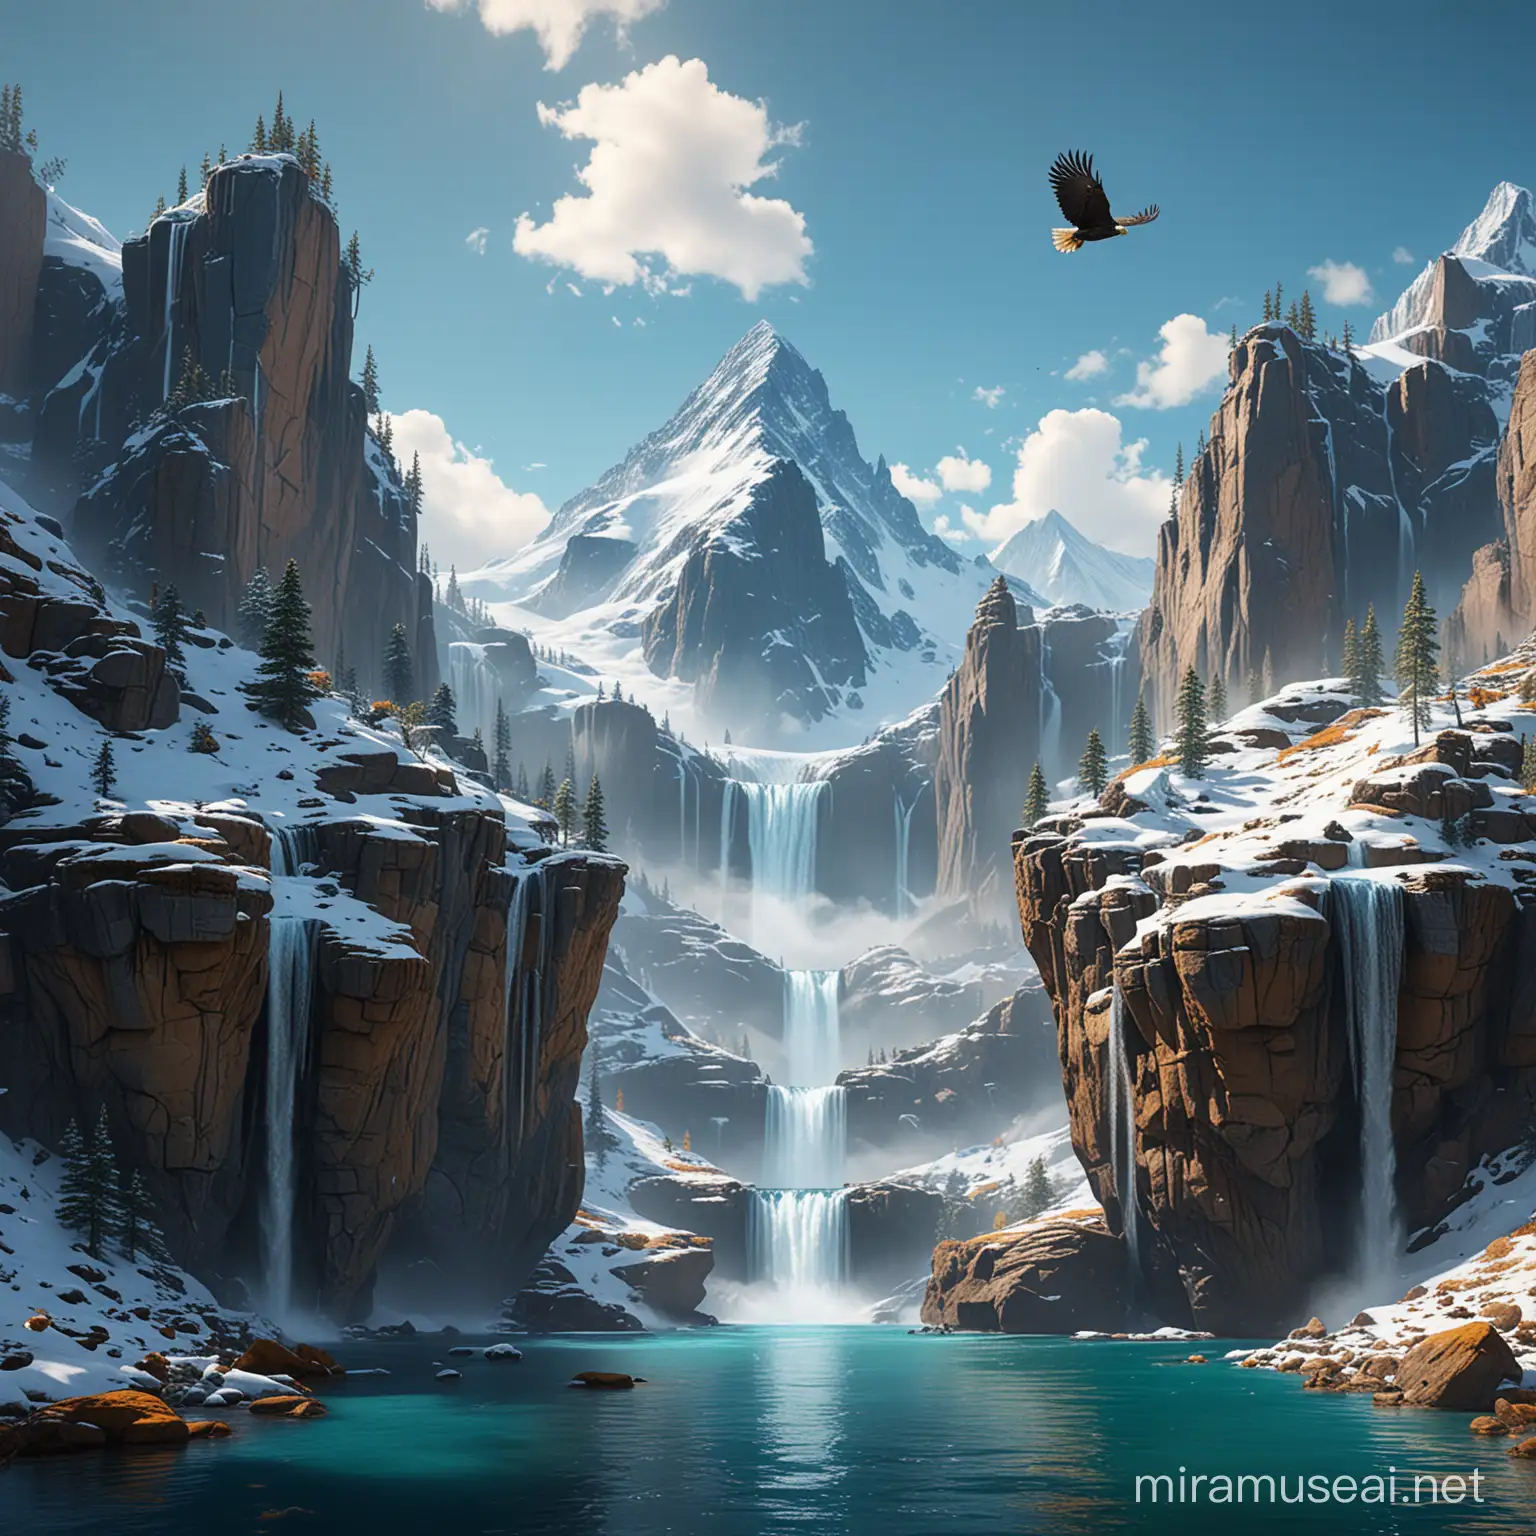 Floating Mountain Majesty: A surreal landscape where a towering, snow-capped mountain with cascading waterfalls is set atop a giant, floating island held aloft by a ring of massive, outstretched stone hands. The sky is a clear, vivid blue, with a majestic eagle in flight, creating a sense of freedom and grandeur. The entire scene is a fantastical blend of natural wonder and gravity-defying elements, rich in vibrant colors and dynamic contrasts, 32k render, hyperrealistic, detailed.